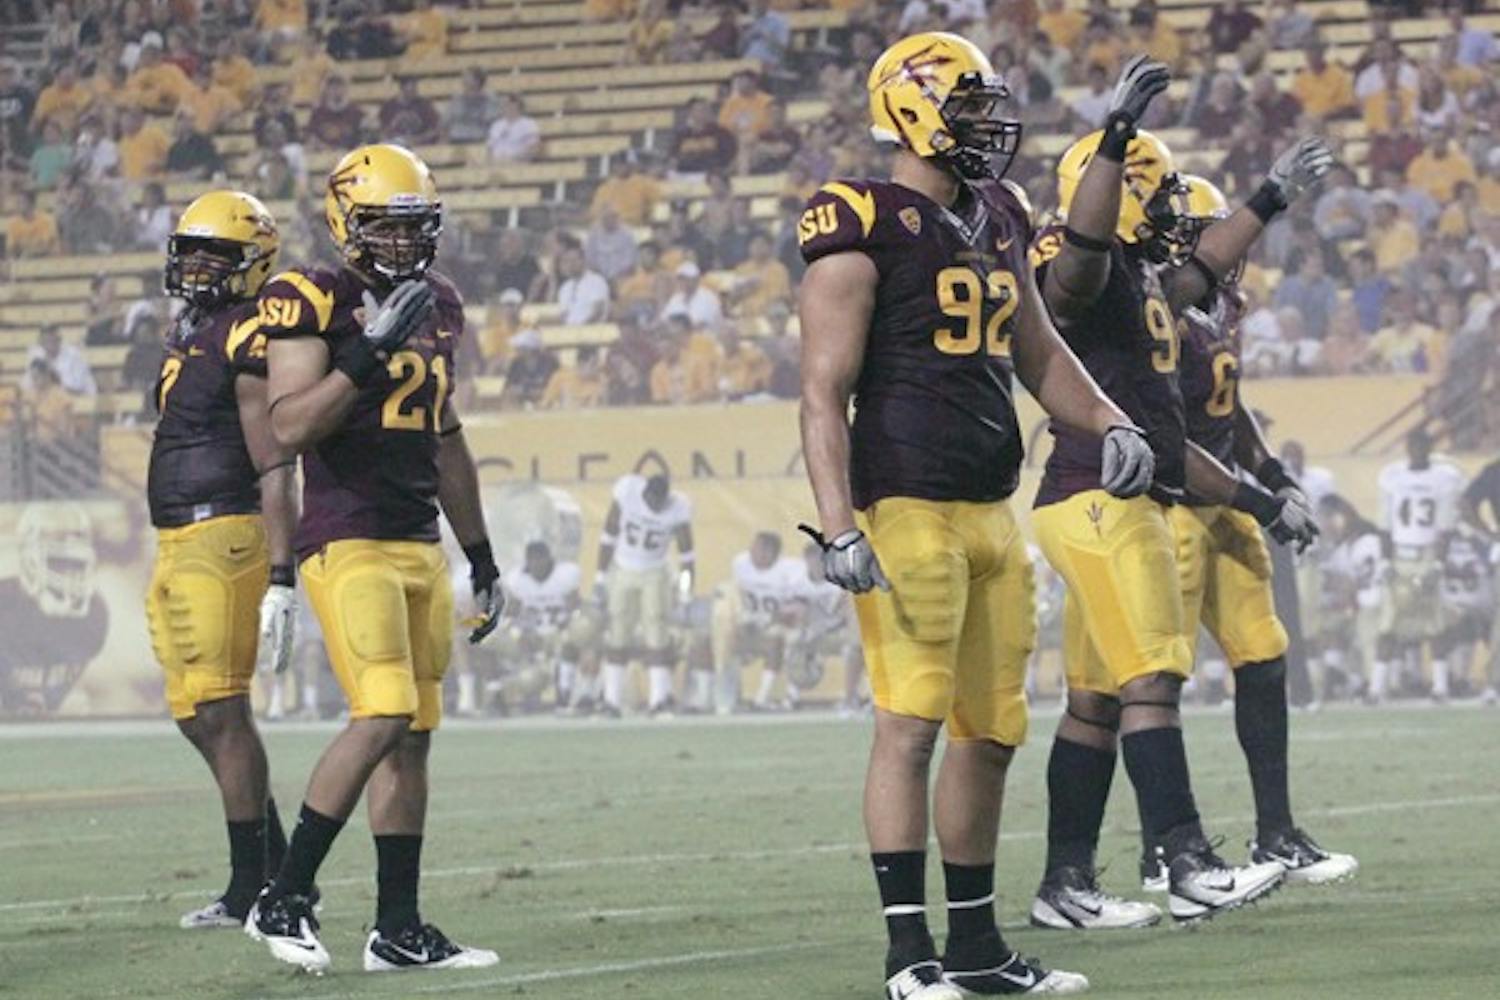 UNDER THE RADAR: ASU redshirt senior linebacker Colin Parker (21) looks to the sideline during the Sun Devils’ victory over UC Davis on Sept. 1. Parker has been the unsung leader of the ASU defense all season. (Photo by Beth Easterbrook)